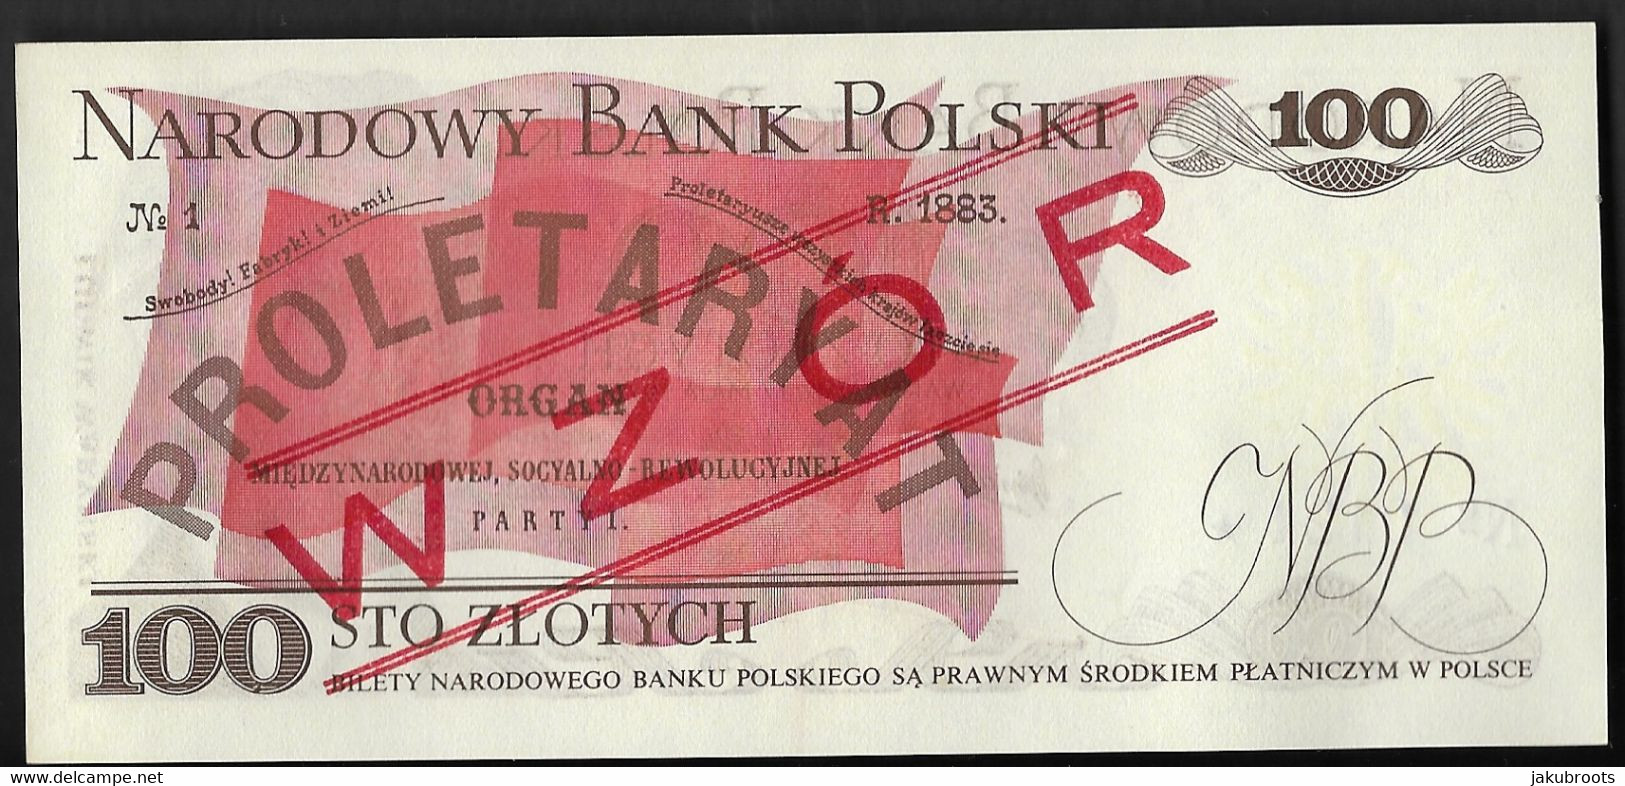 MAY 1976 POLISH NATIONAL STATE BANK 100 Zl.SPECIMEN / WZOR  Mint Condition - Polen